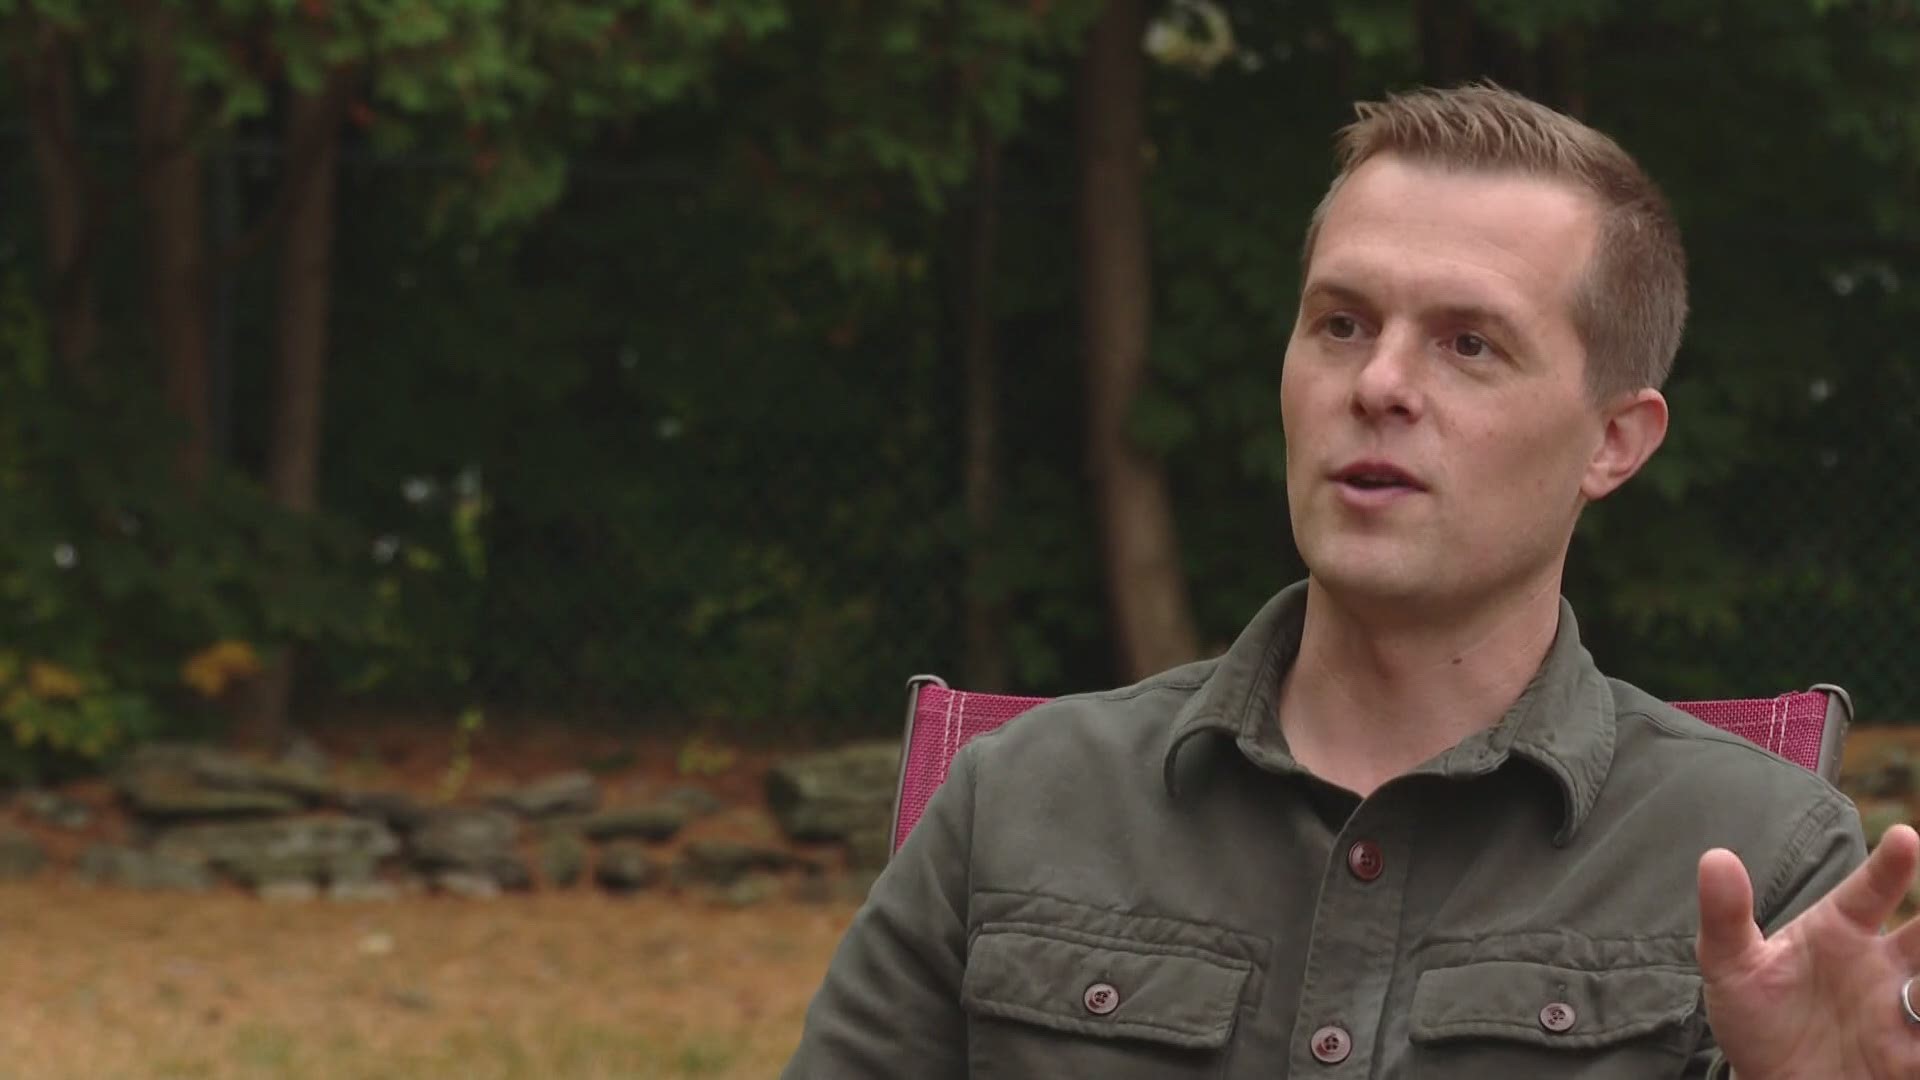 NEWS CENTER Maine's Hannah Dineen sits down with Jared Golden at his home in Lewiston to discuss his background and what has shaped him into the man he is now.